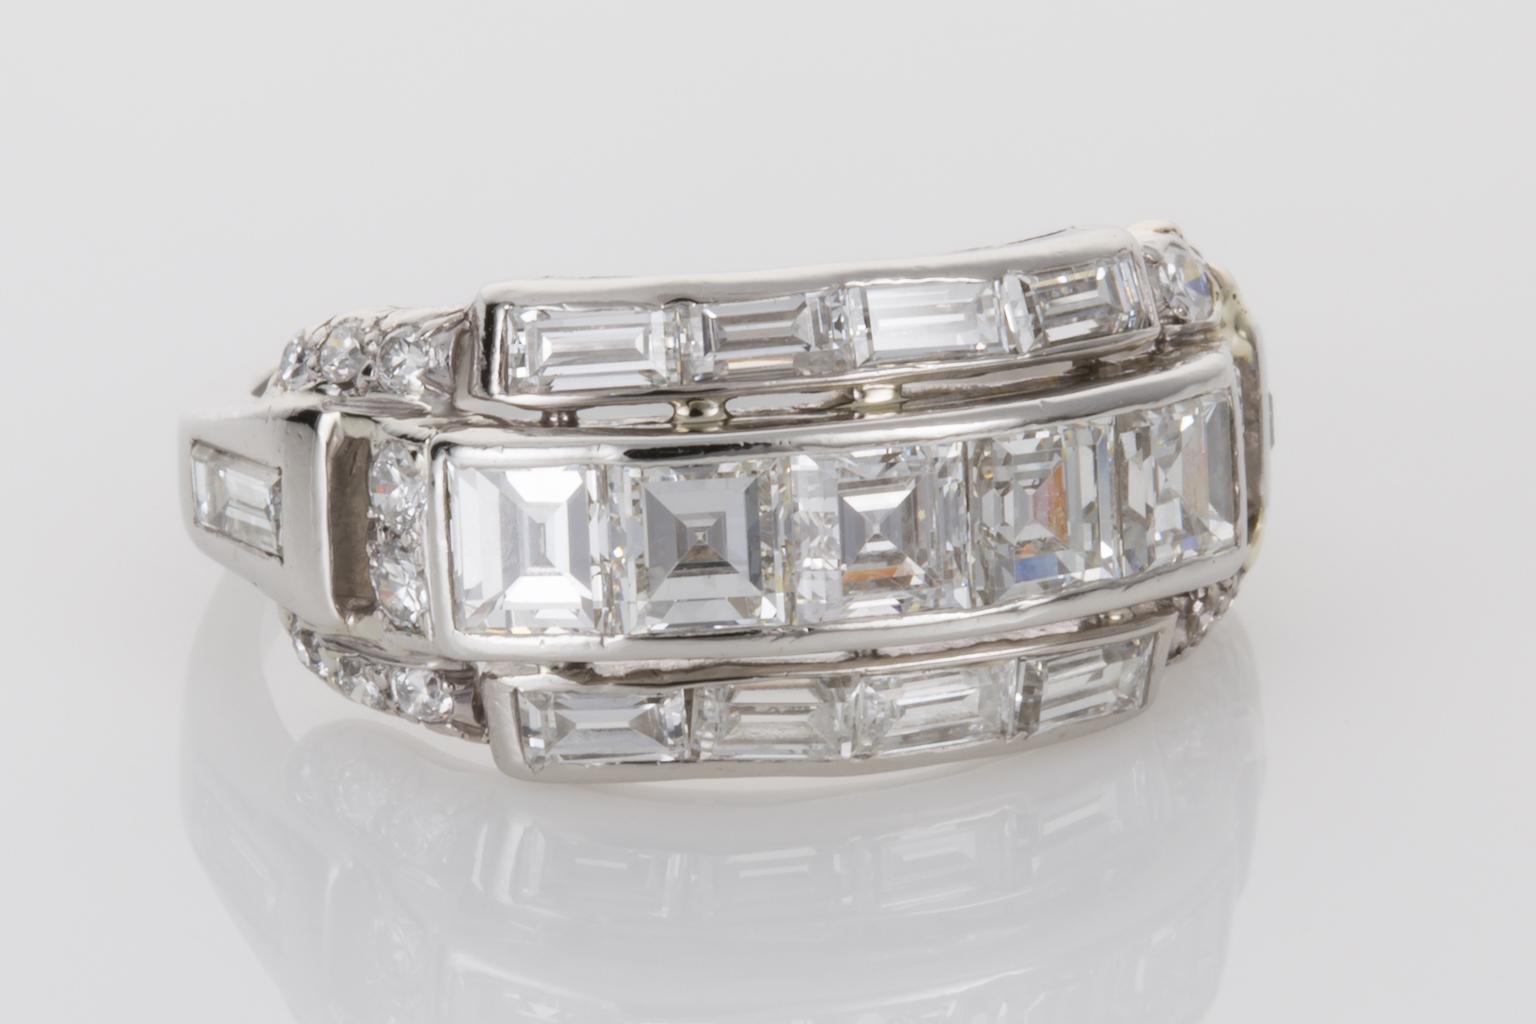 A beauty from another era, this stylish original platinum Art Deco ring is incredibly beautiful. Set with top quality diamonds the combination of the diamond cuts shows true Art Deco geometric drama. 
The channel set central diamonds consist of 5